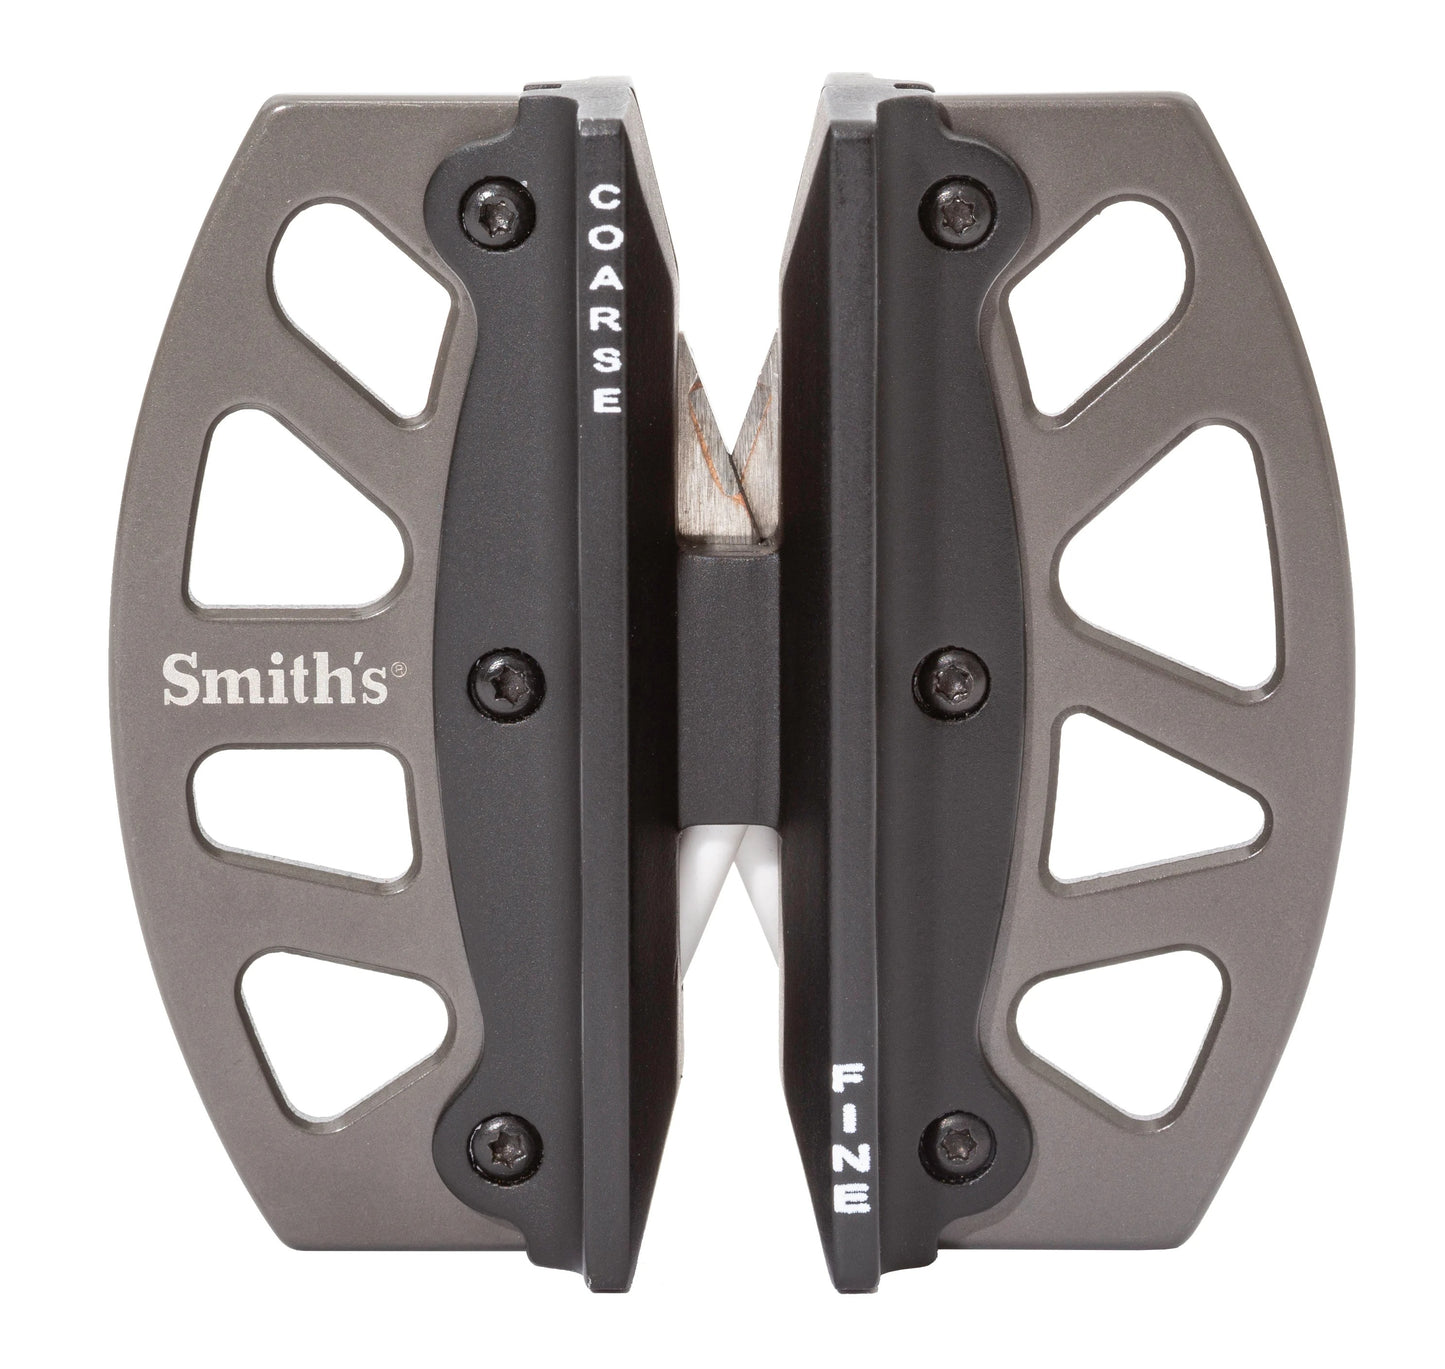 Smiths Caprella 2-Step Knife Sharpener for Straight and Serrated Blades #51106